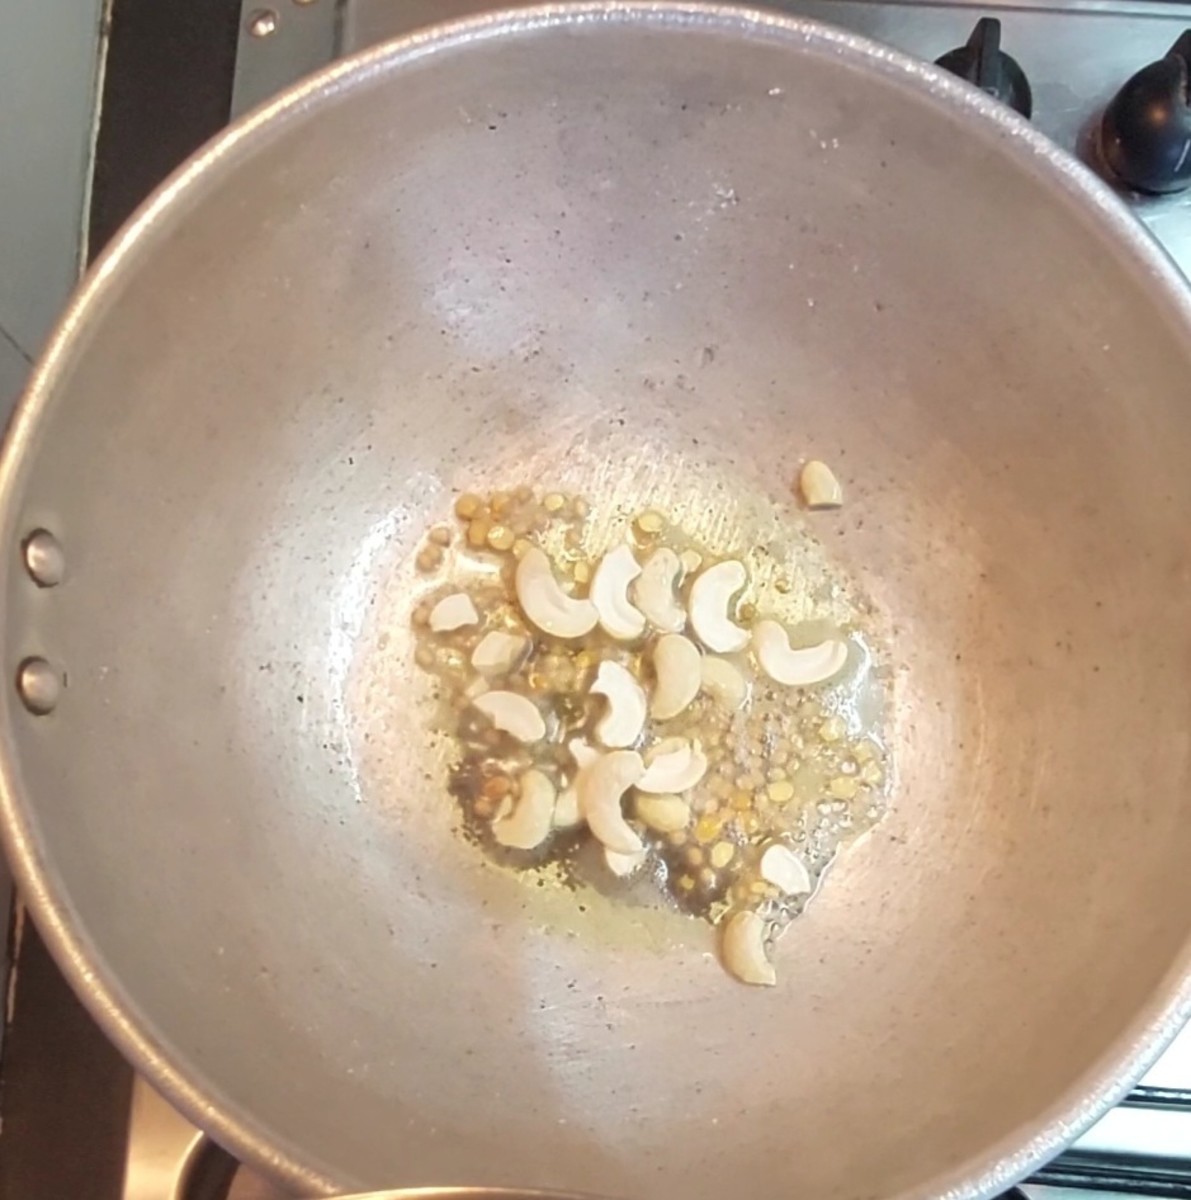 In the same pan, heat 1 tablespoon ghee and 1 tablespoon oil. Splutter 1 teaspoon mustard seeds. Add 1 teaspoon urad dal and 1 teaspoon chana dal and fry for a few seconds. Add 9-10 cashews and fry till they turn golden brown.